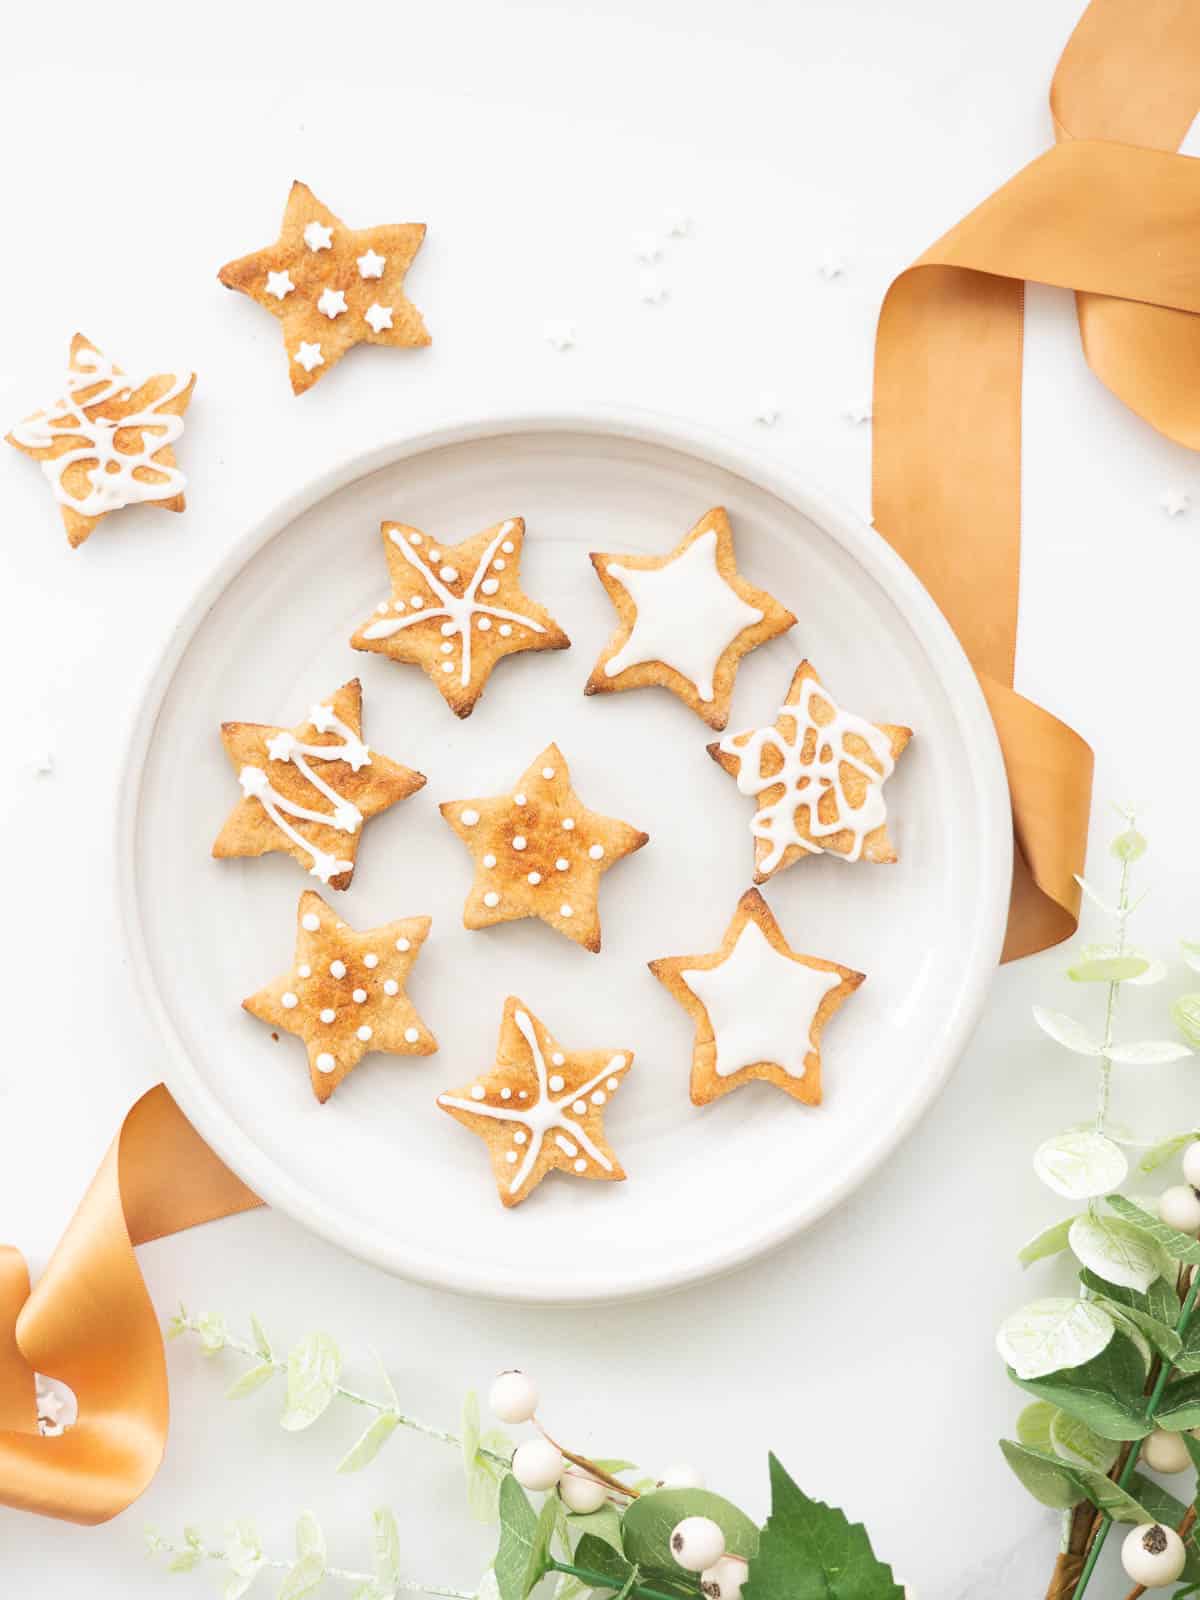 Star shaped cookies decorated with white royal icing. 